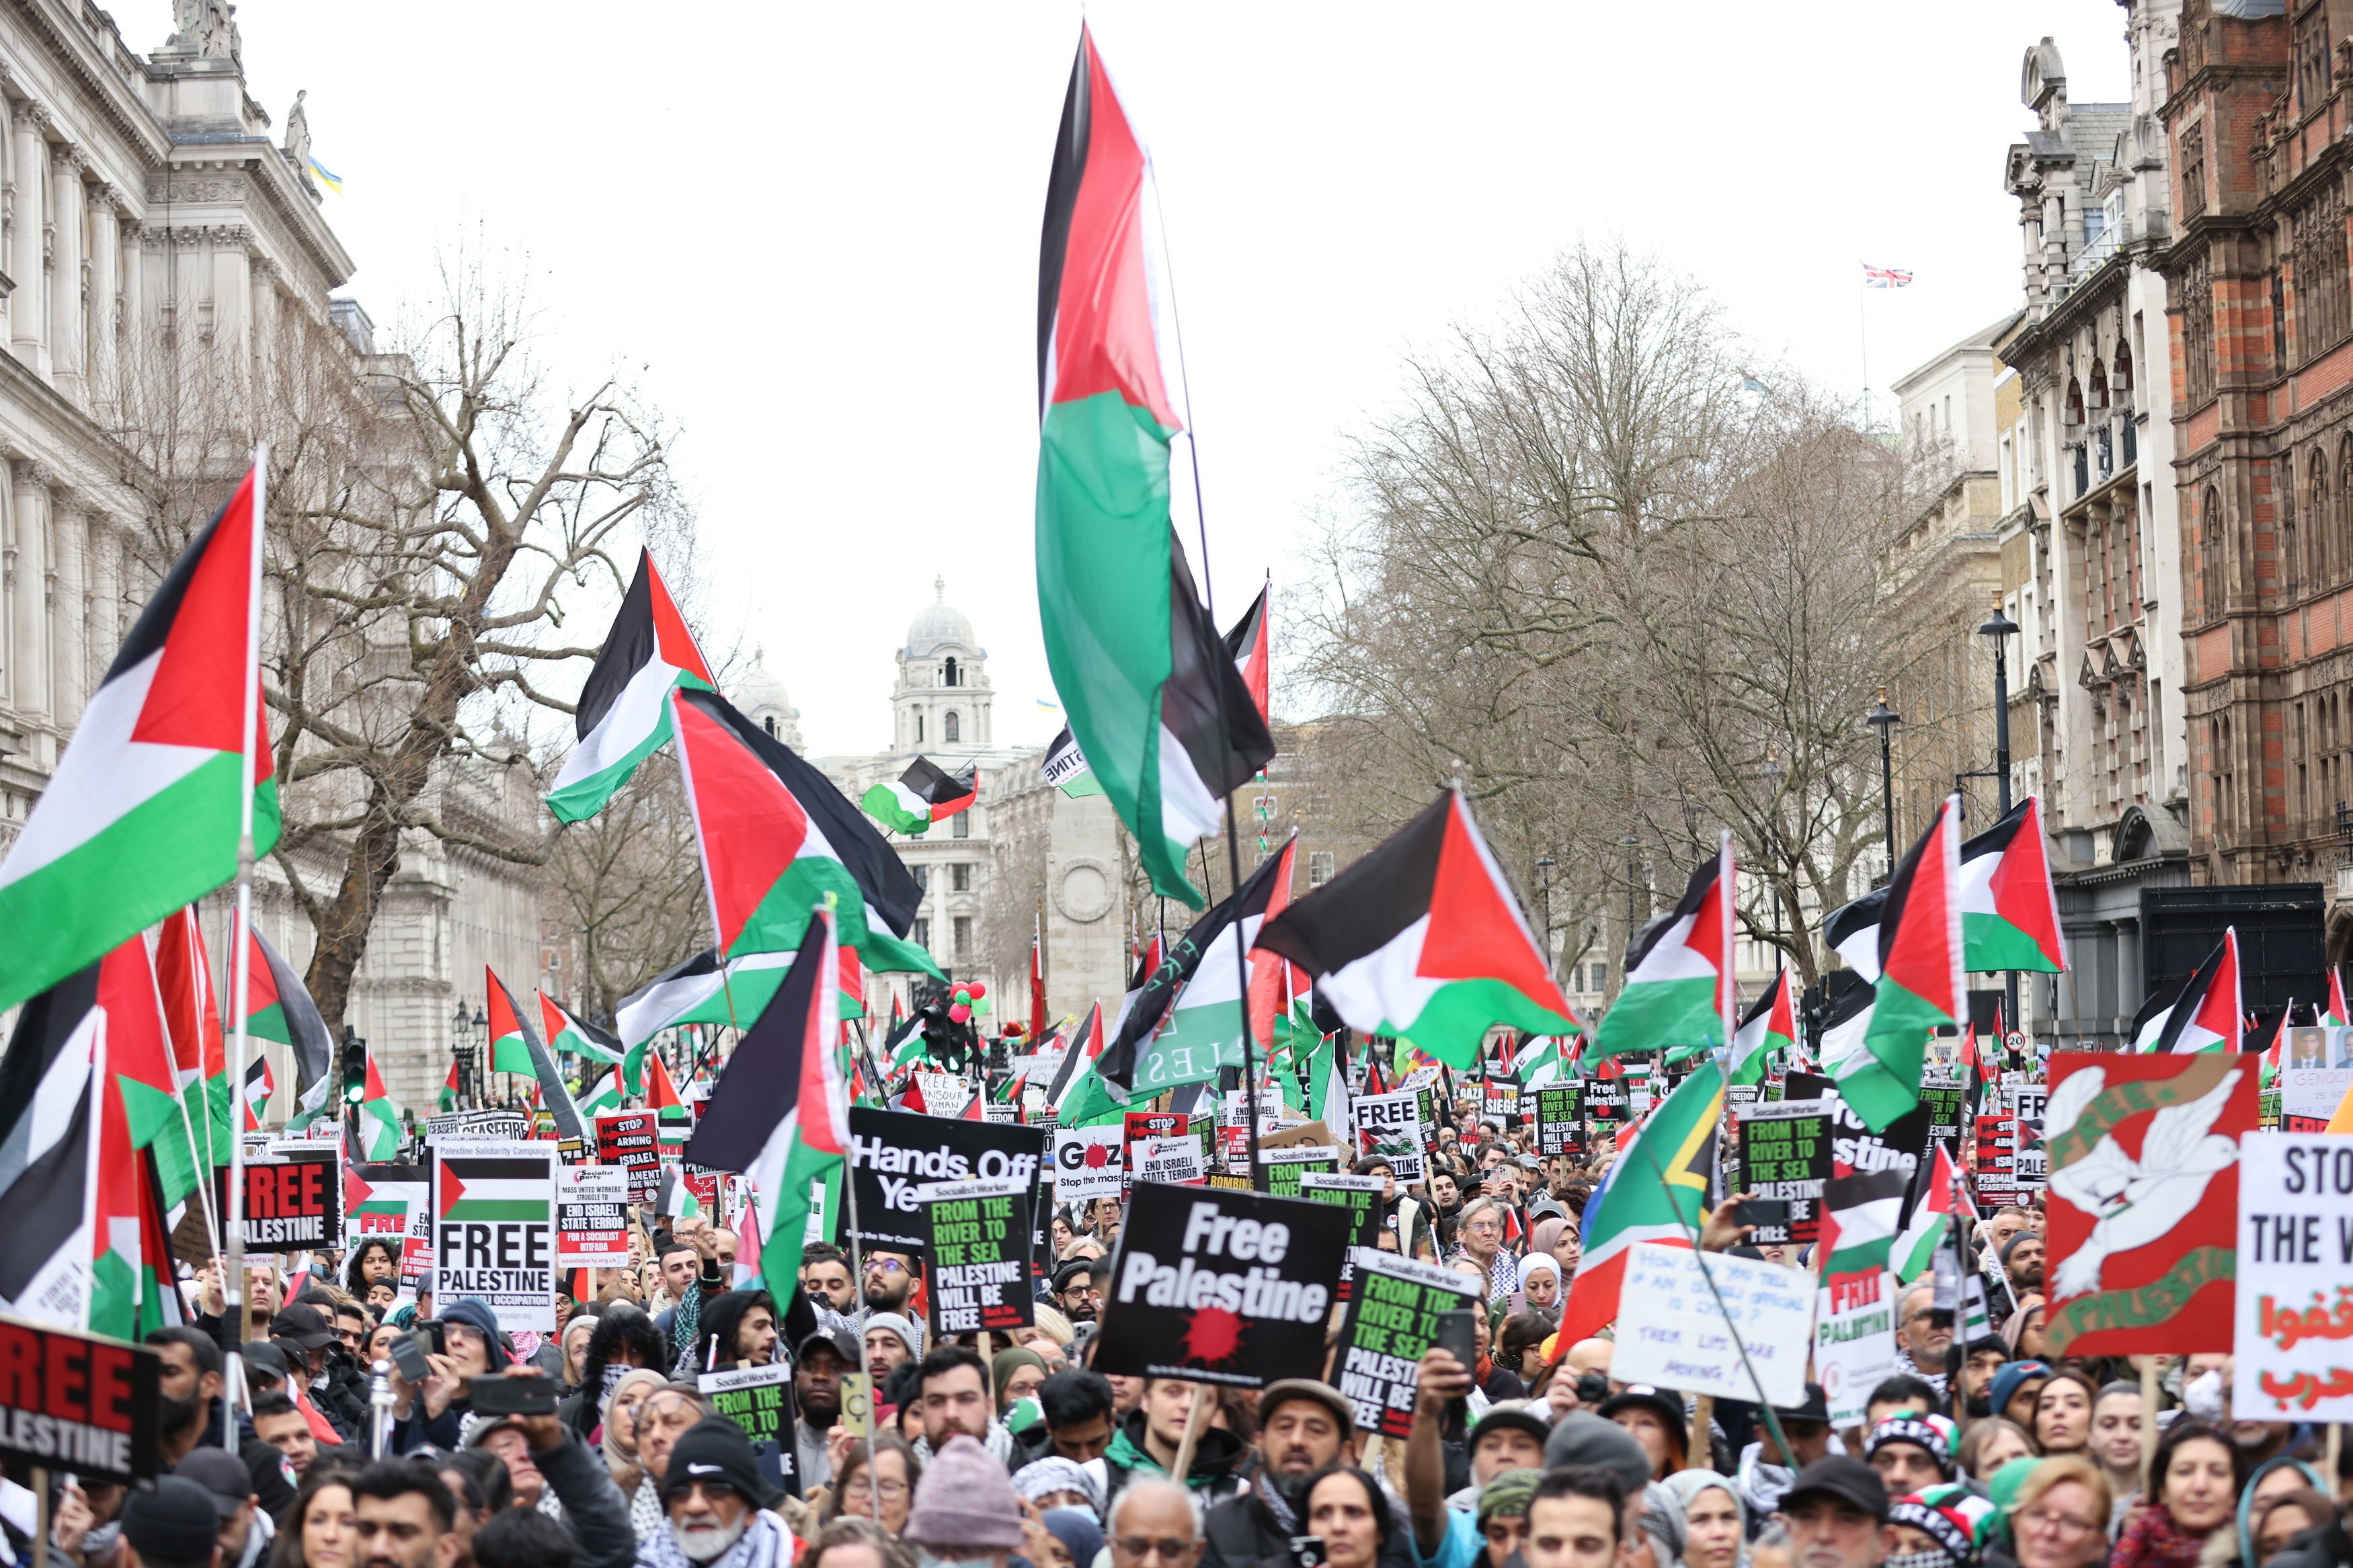 Thousands gathered to call for a ceasefire in the conflict between Israel and Hamas